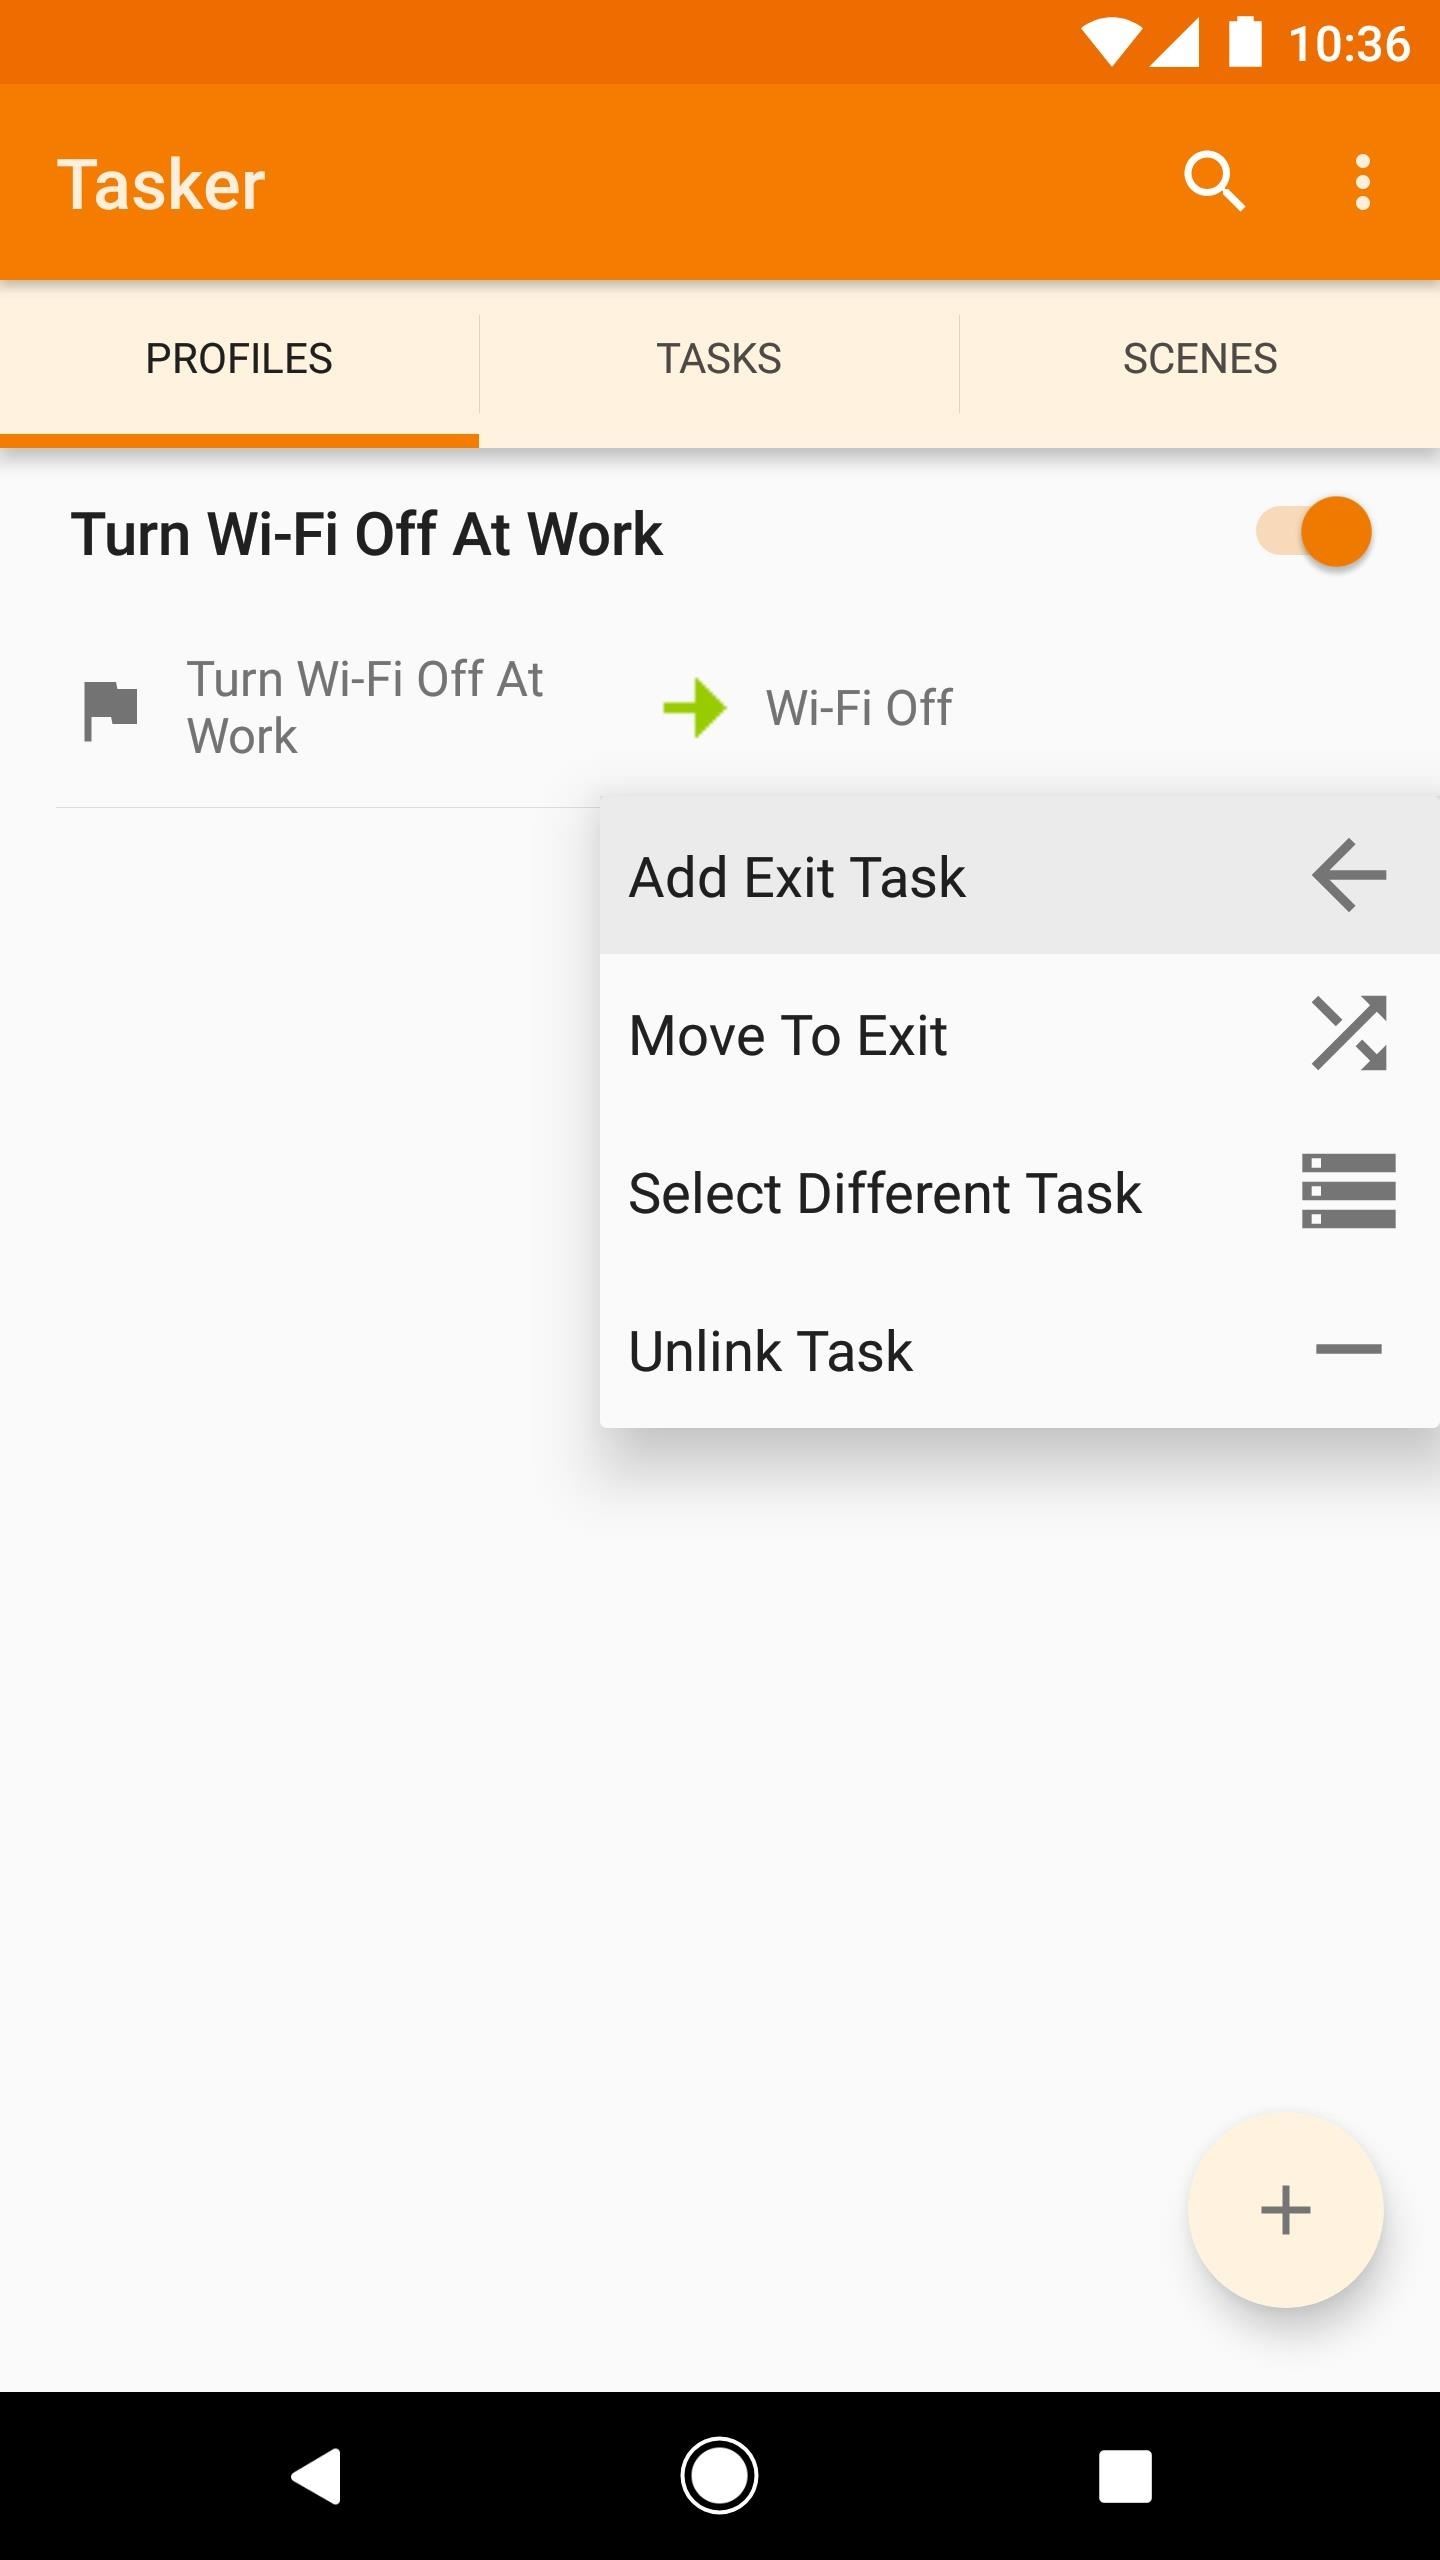 Tasker 101: How to Create an Exit Task